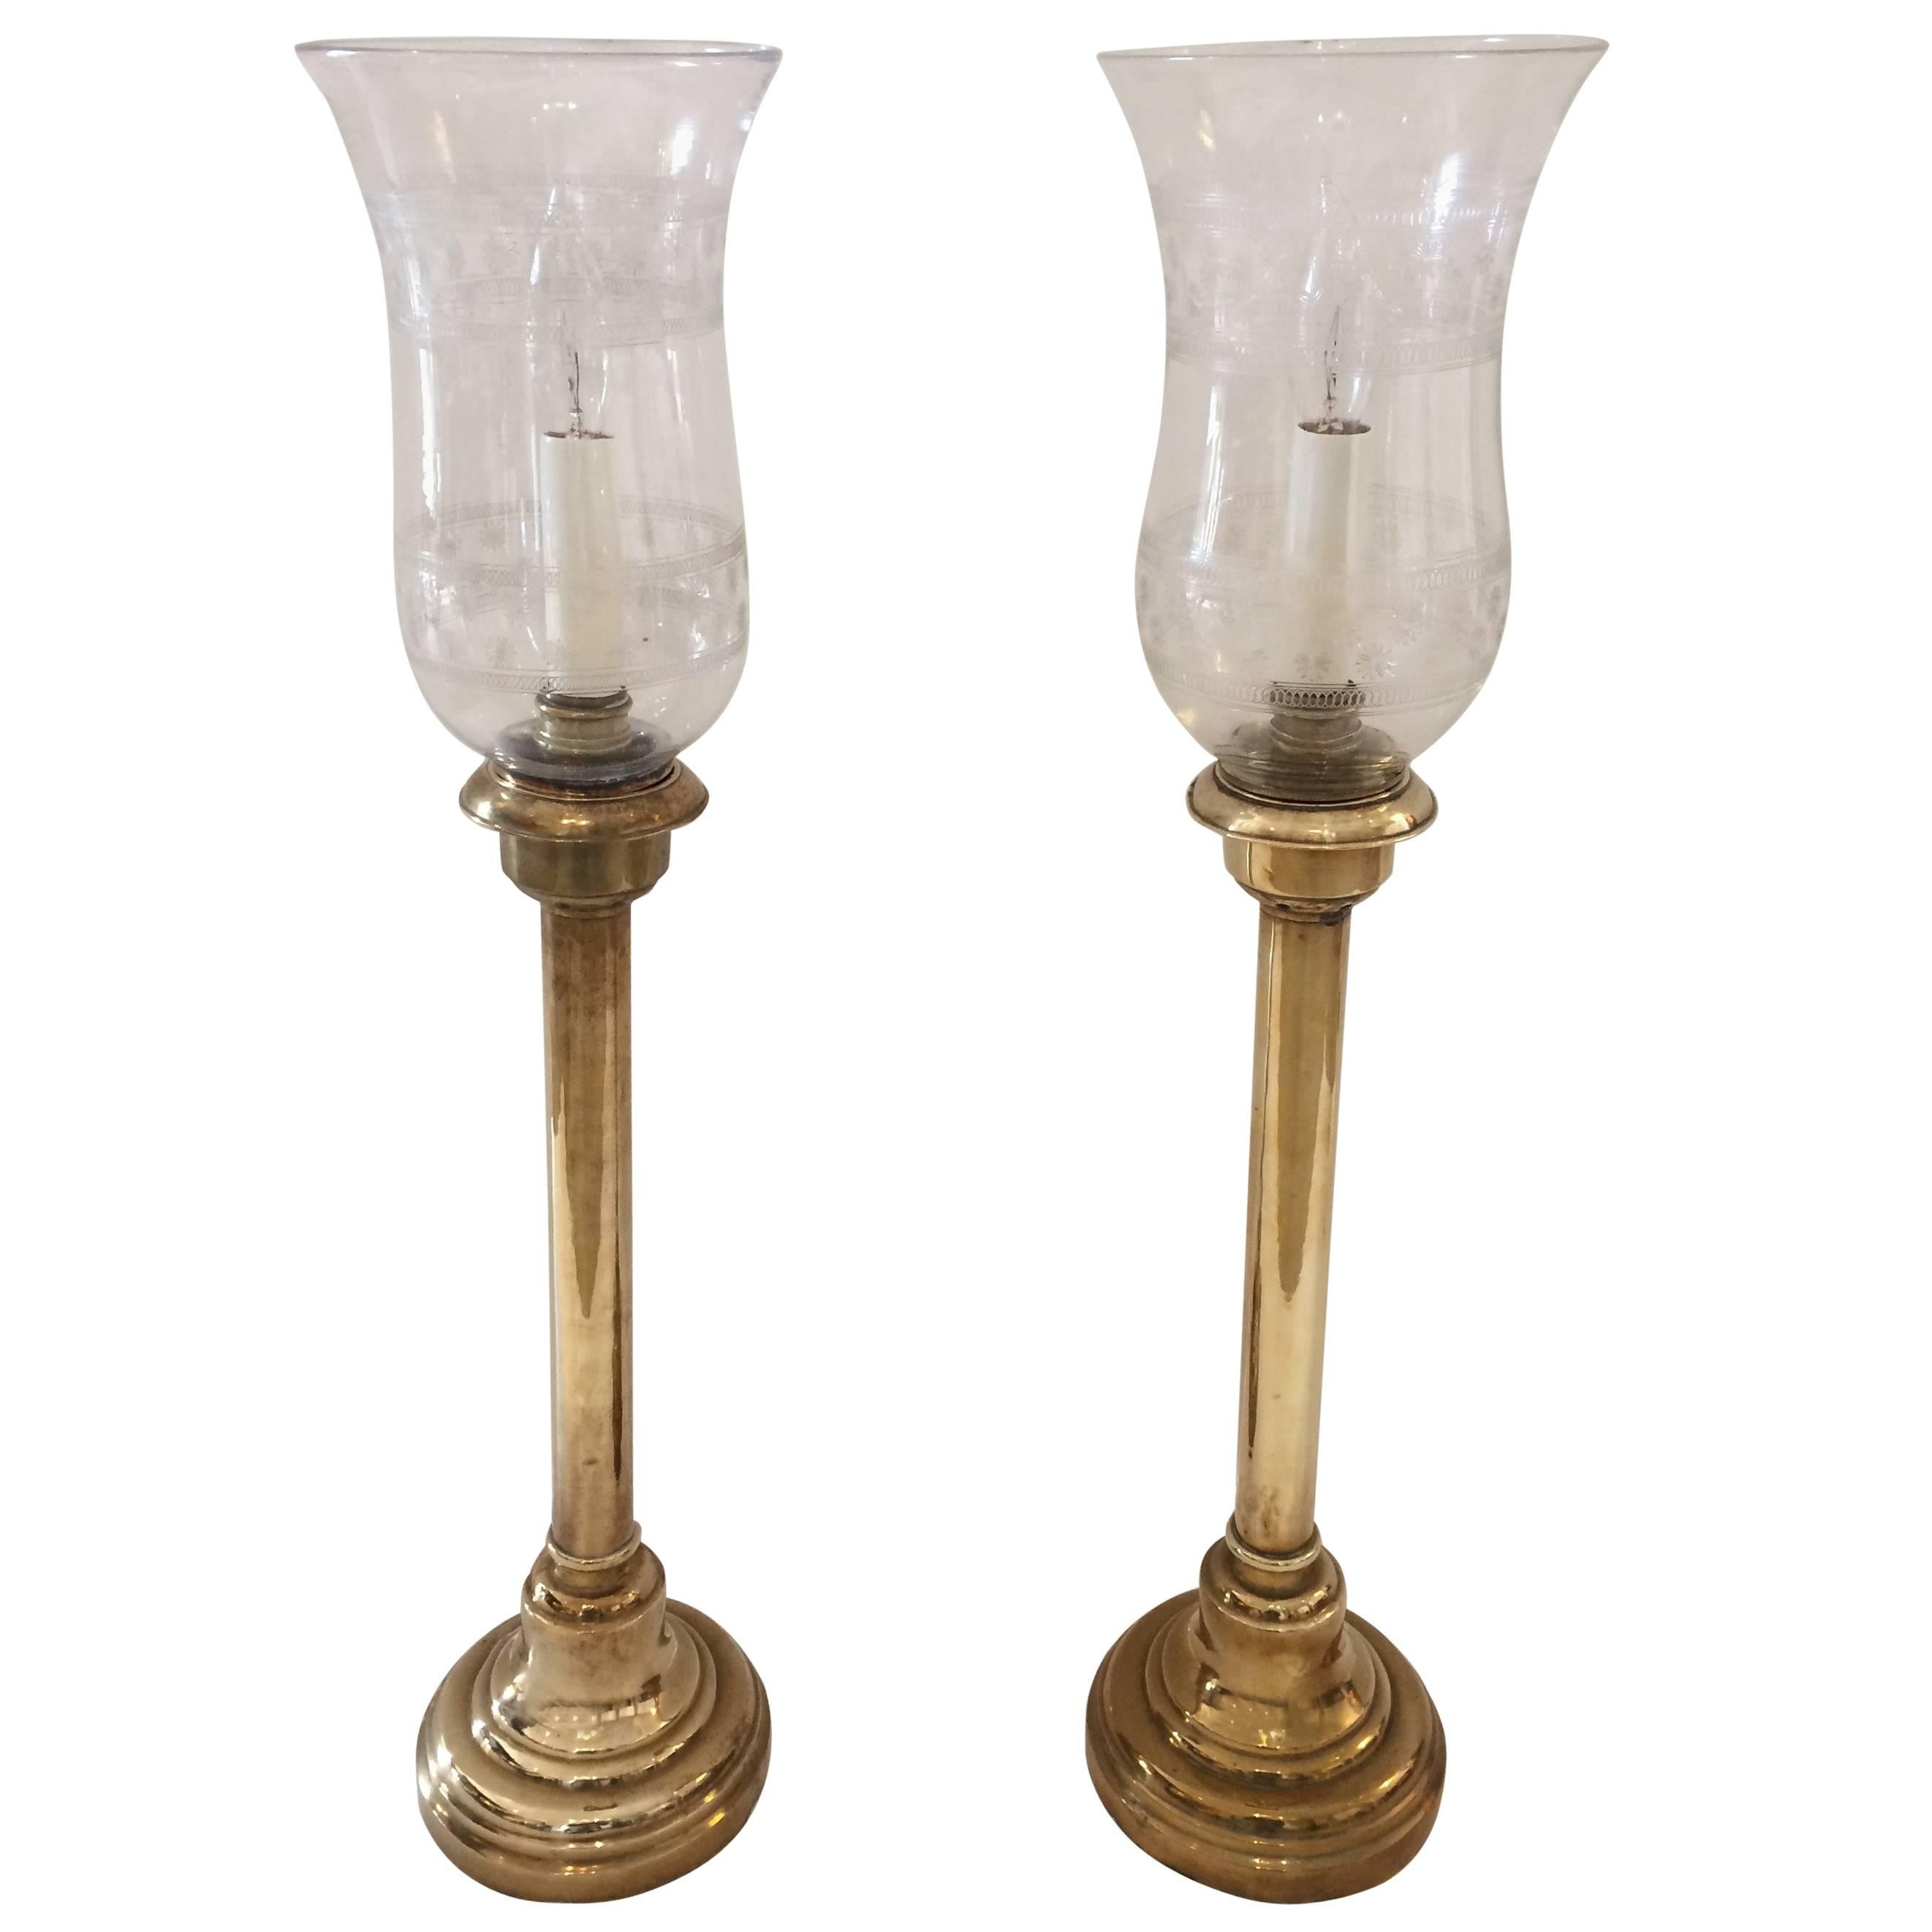 Beautiful Pair of Brass Candlestick Lamps with Original Antique Glass Globes